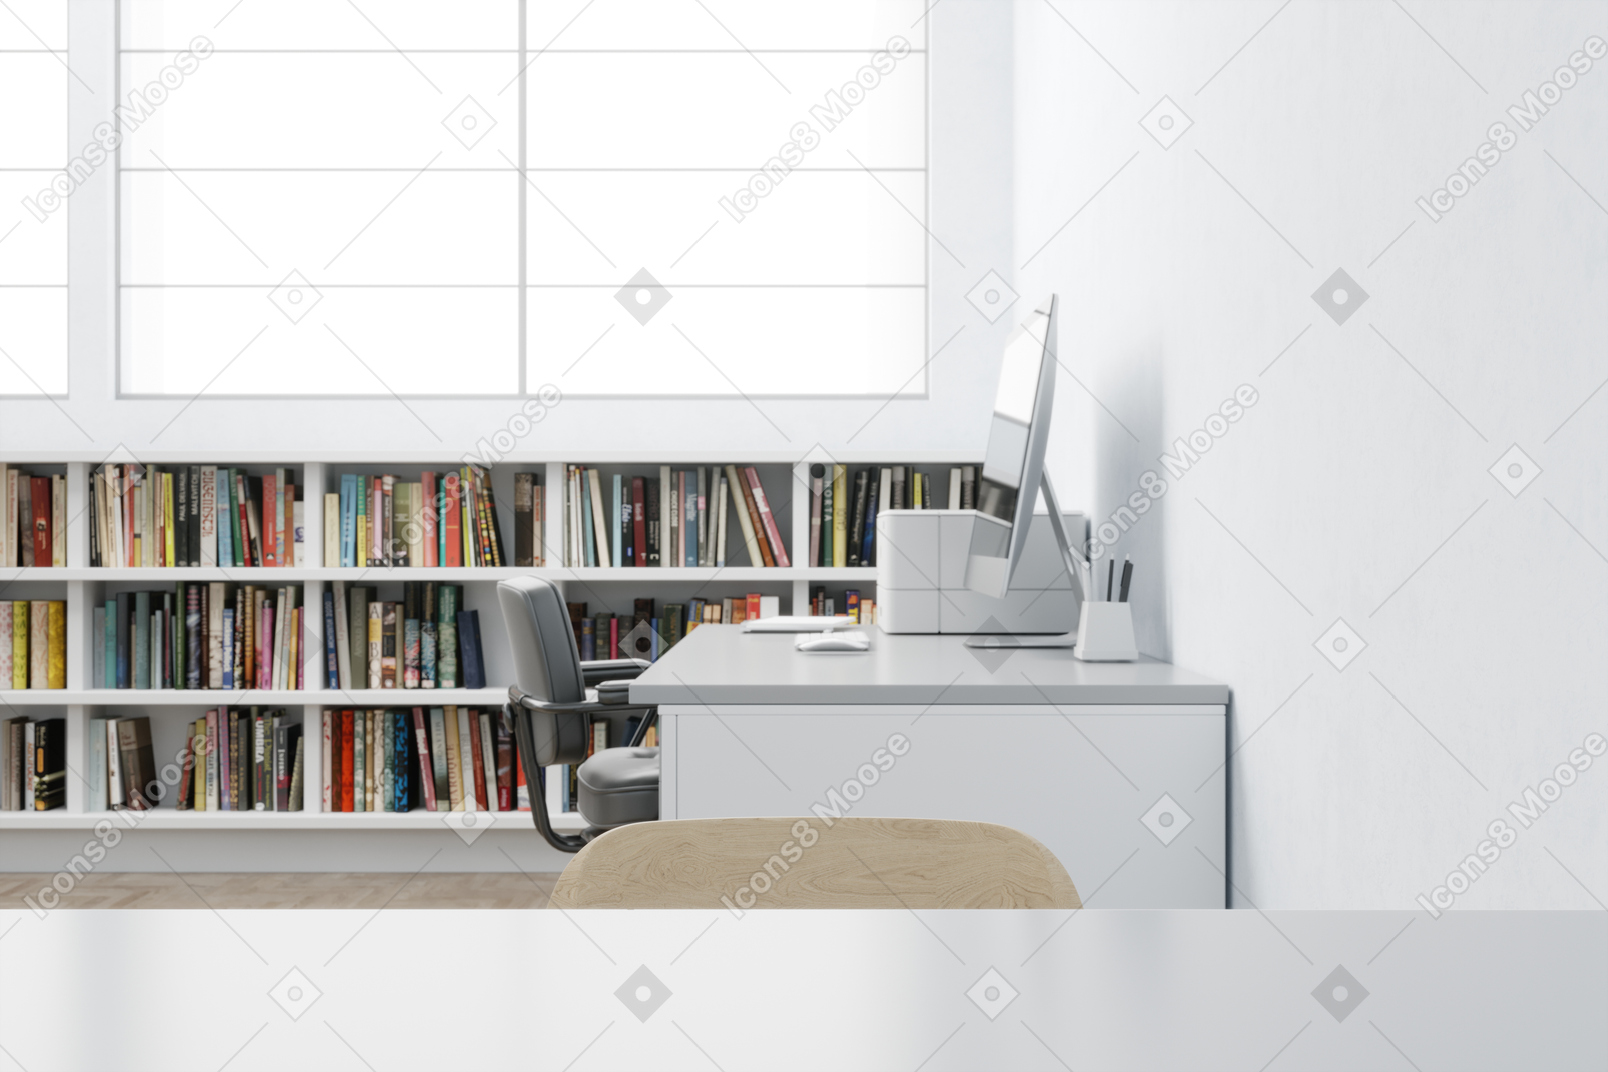 Room with work desks and book shelves